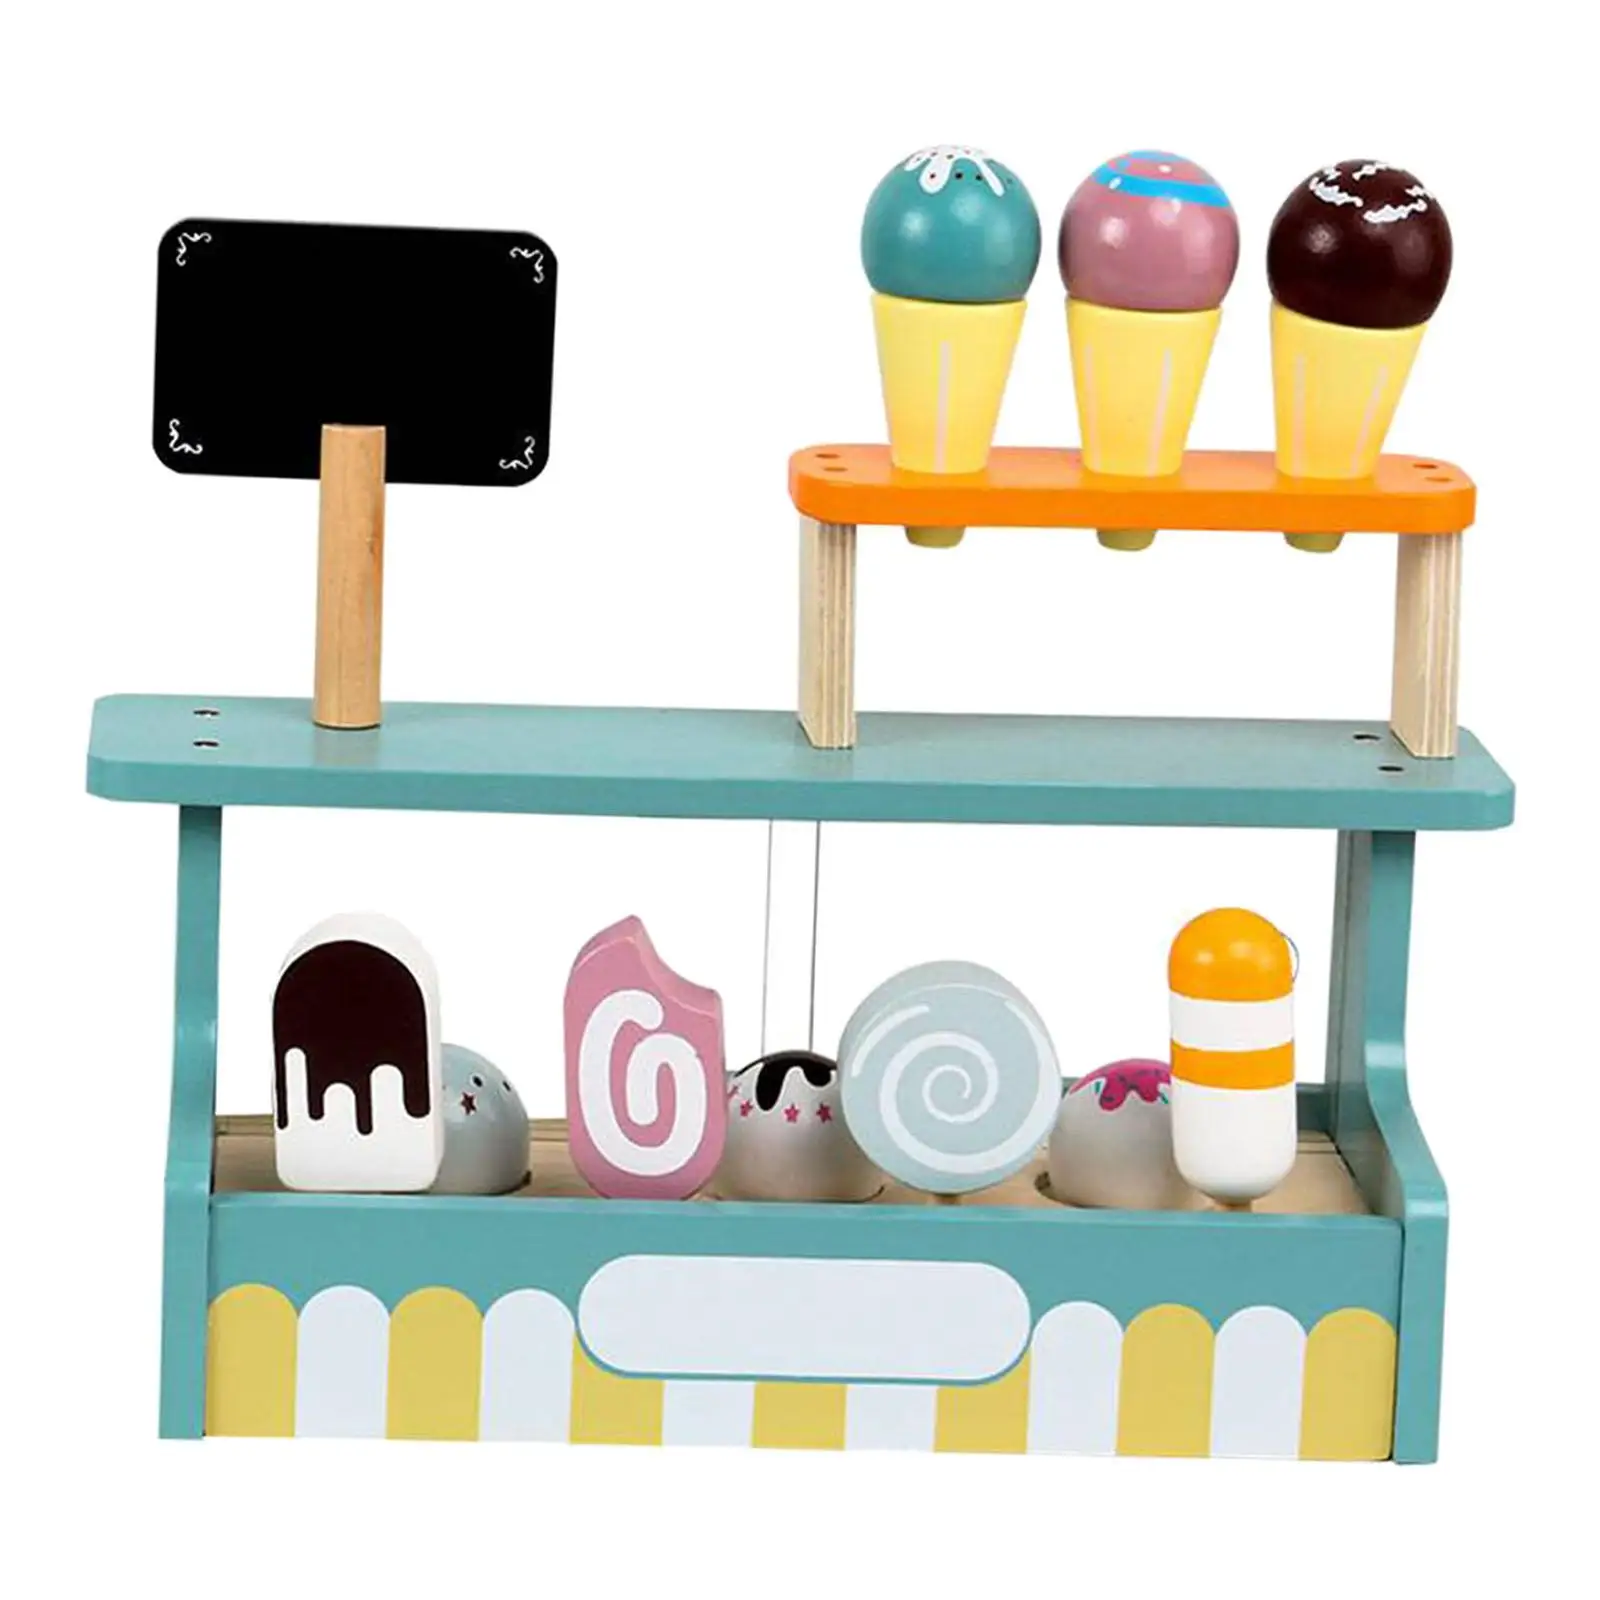 Educational food and Accessories for Interaction Birthday Gift Kitchen Cooking